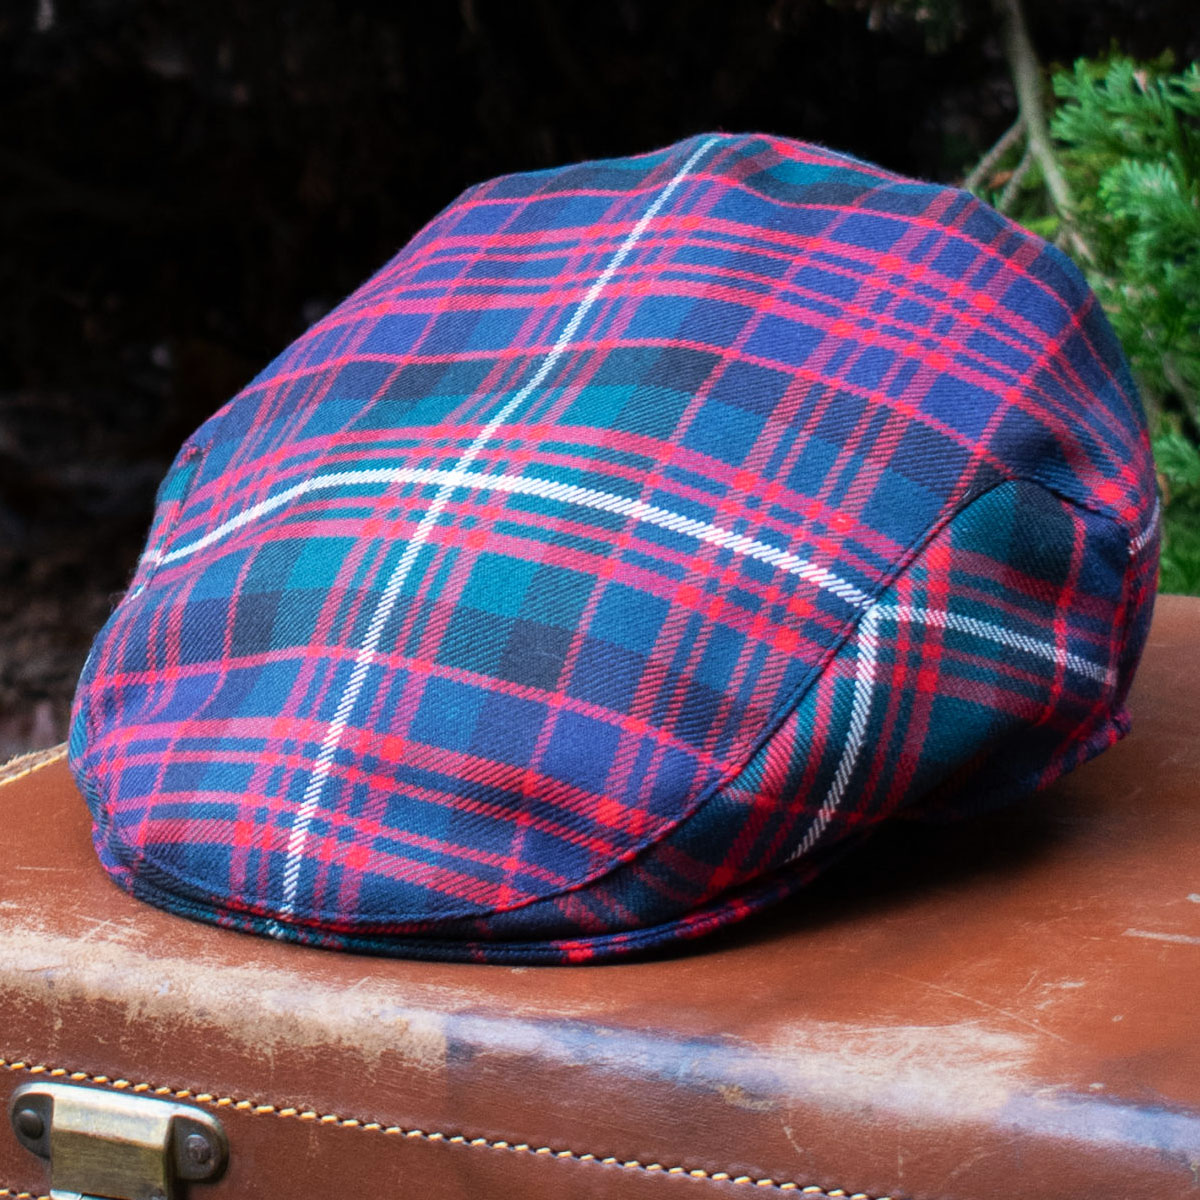 A Premium Wool Tartan Flat Cap in red, blue, and green rests on a closed brown leather suitcase outdoors.